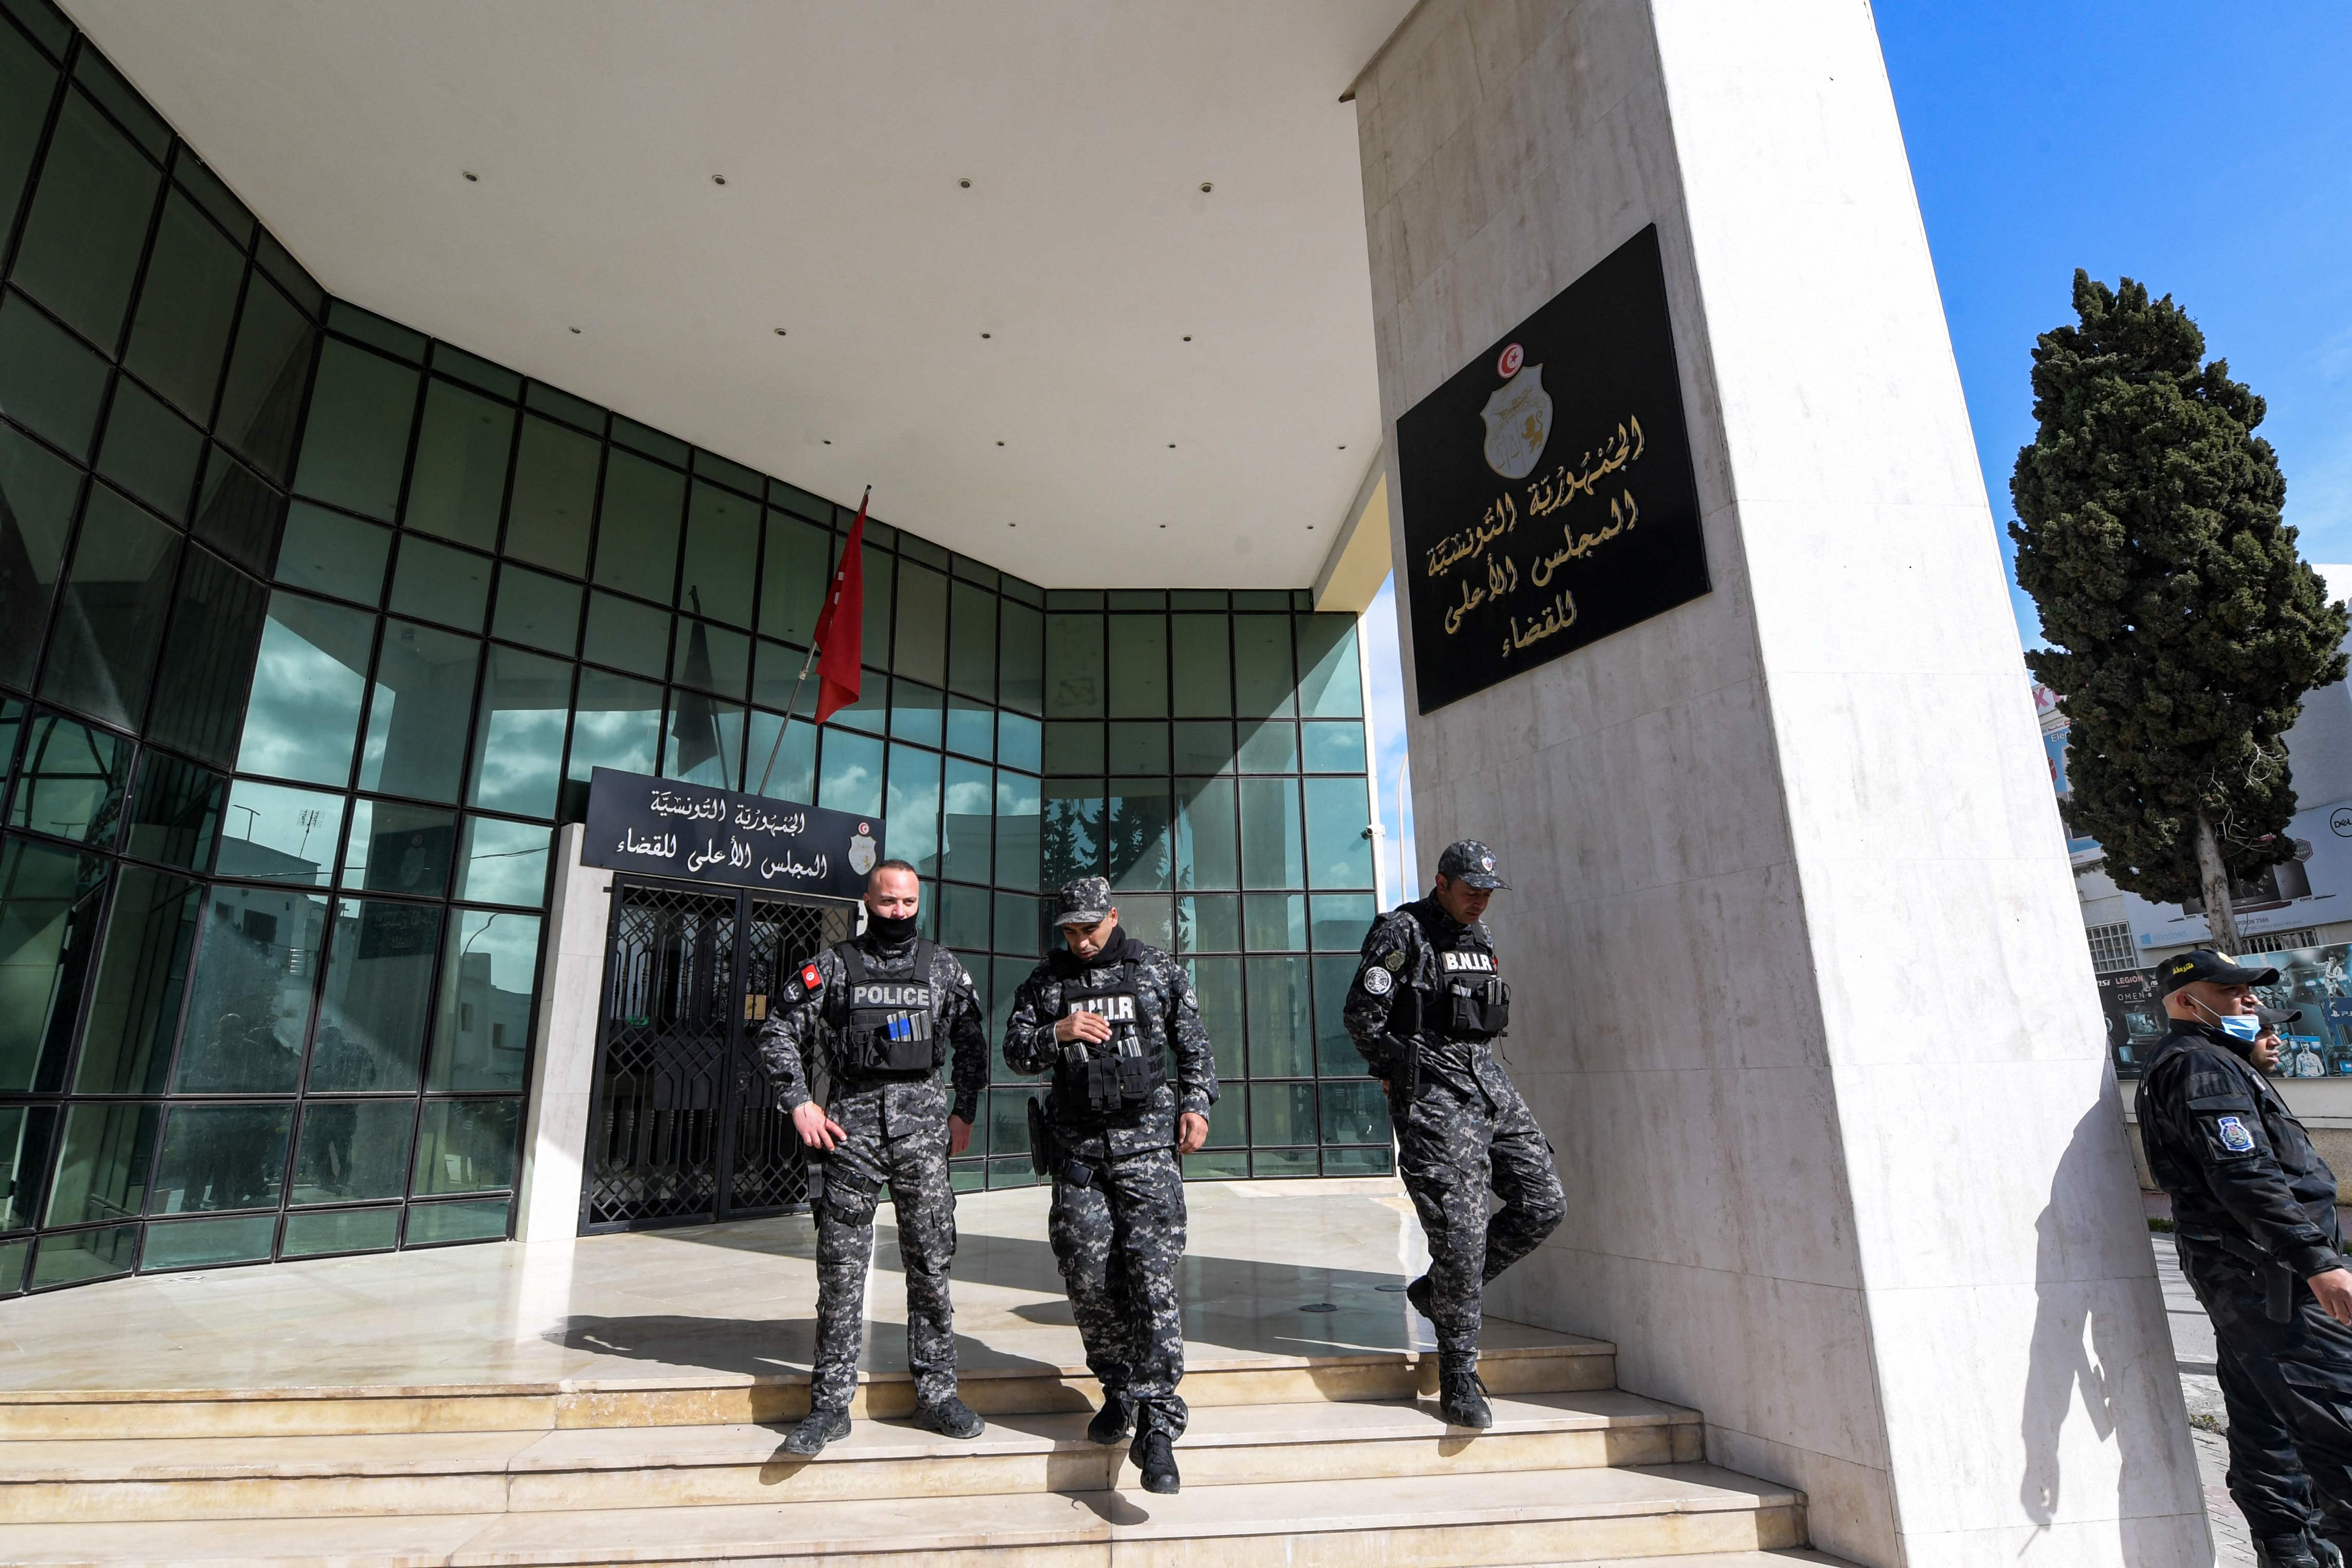 Members of the Tunisian security forces stand outside the closed entrance to the headquarters of Tunisia’s Supreme Judicial Council (CSM) in the capital Tunis on 6 February 2022